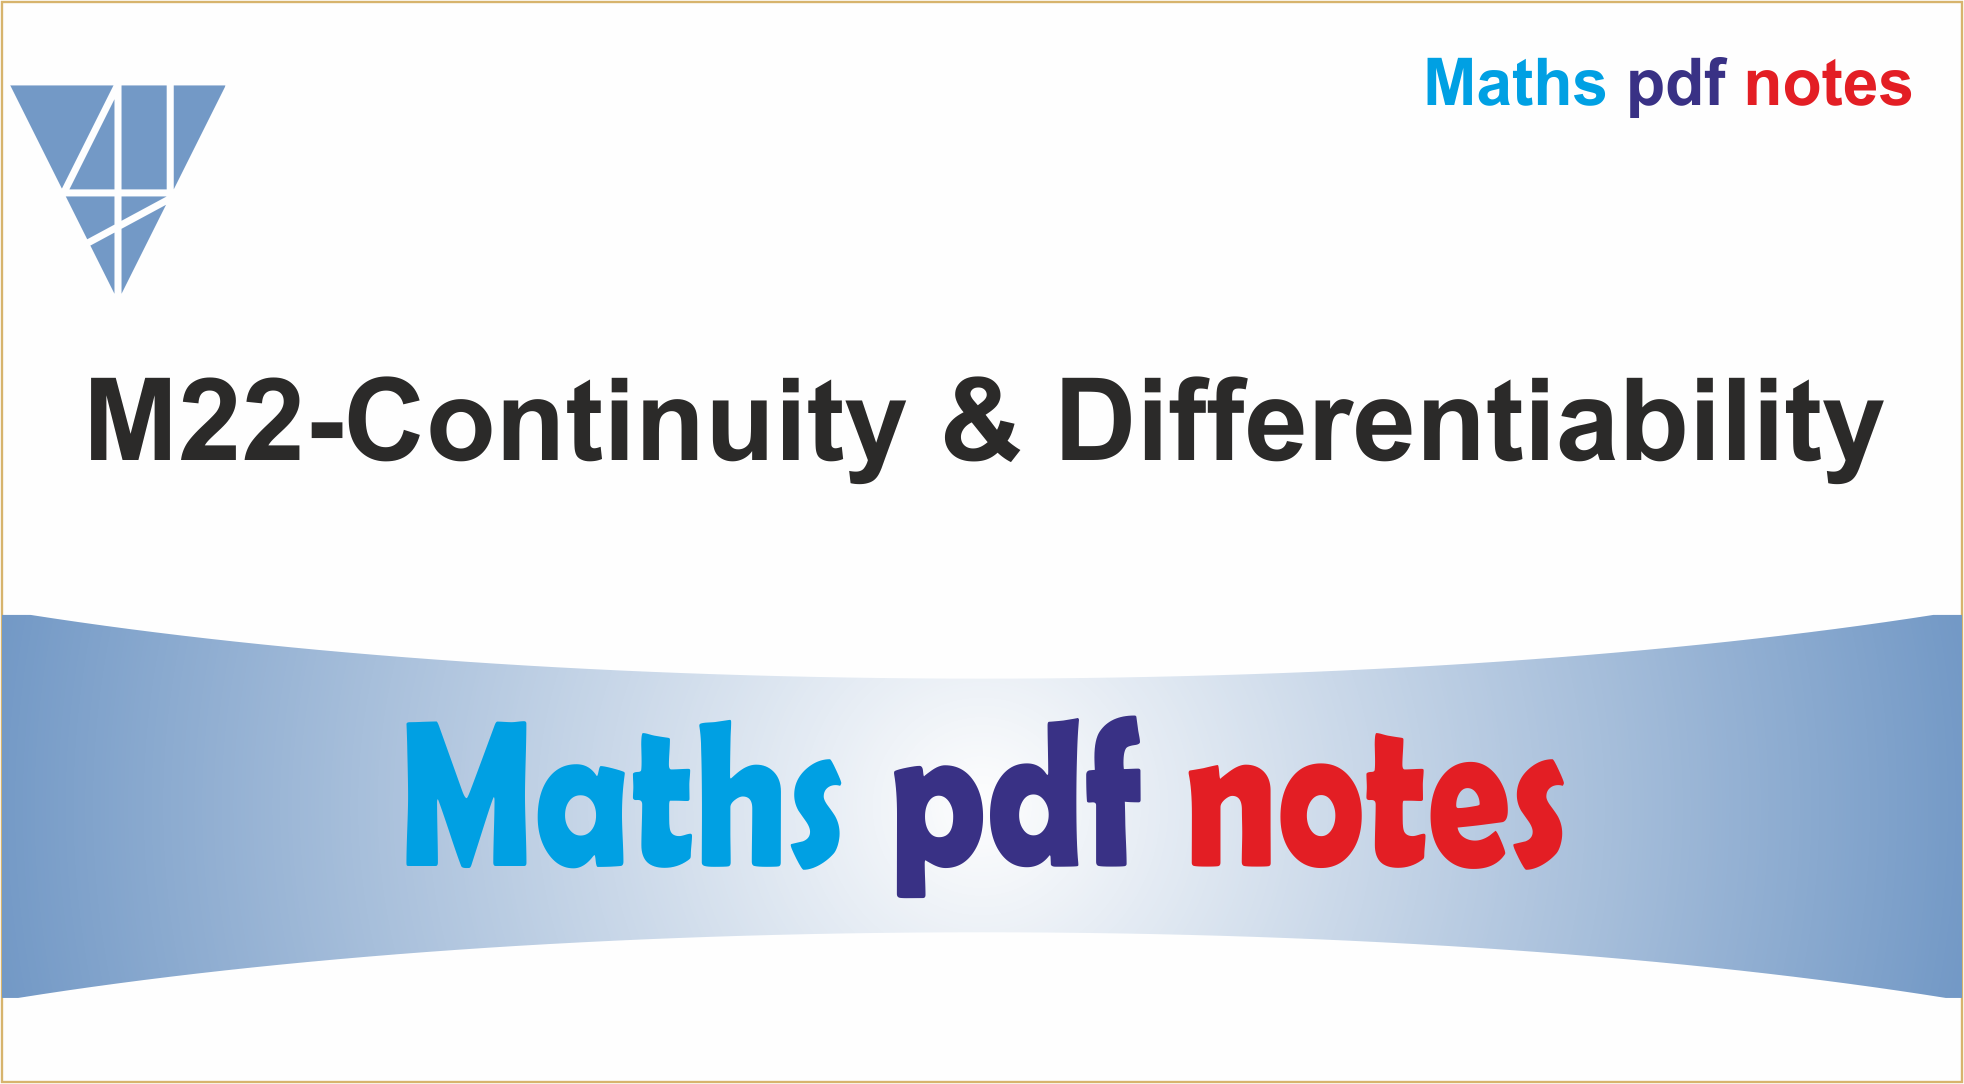 M22-Continuity & Differentiability